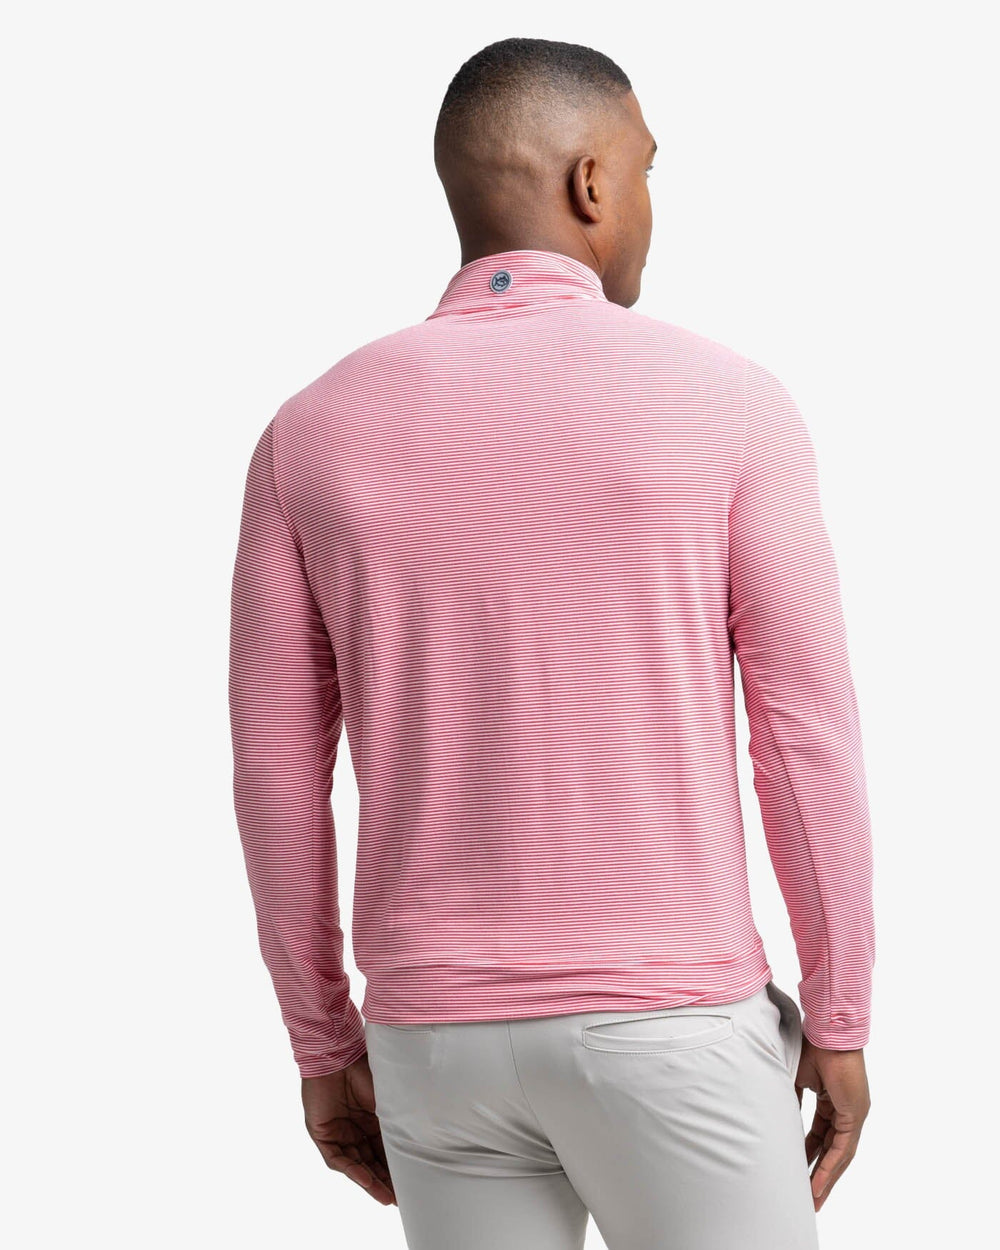 The back view of the Southern Tide Cruiser Micro-Stripe Heather Quarter Zip by Southern Tide - Heather Varsity Red